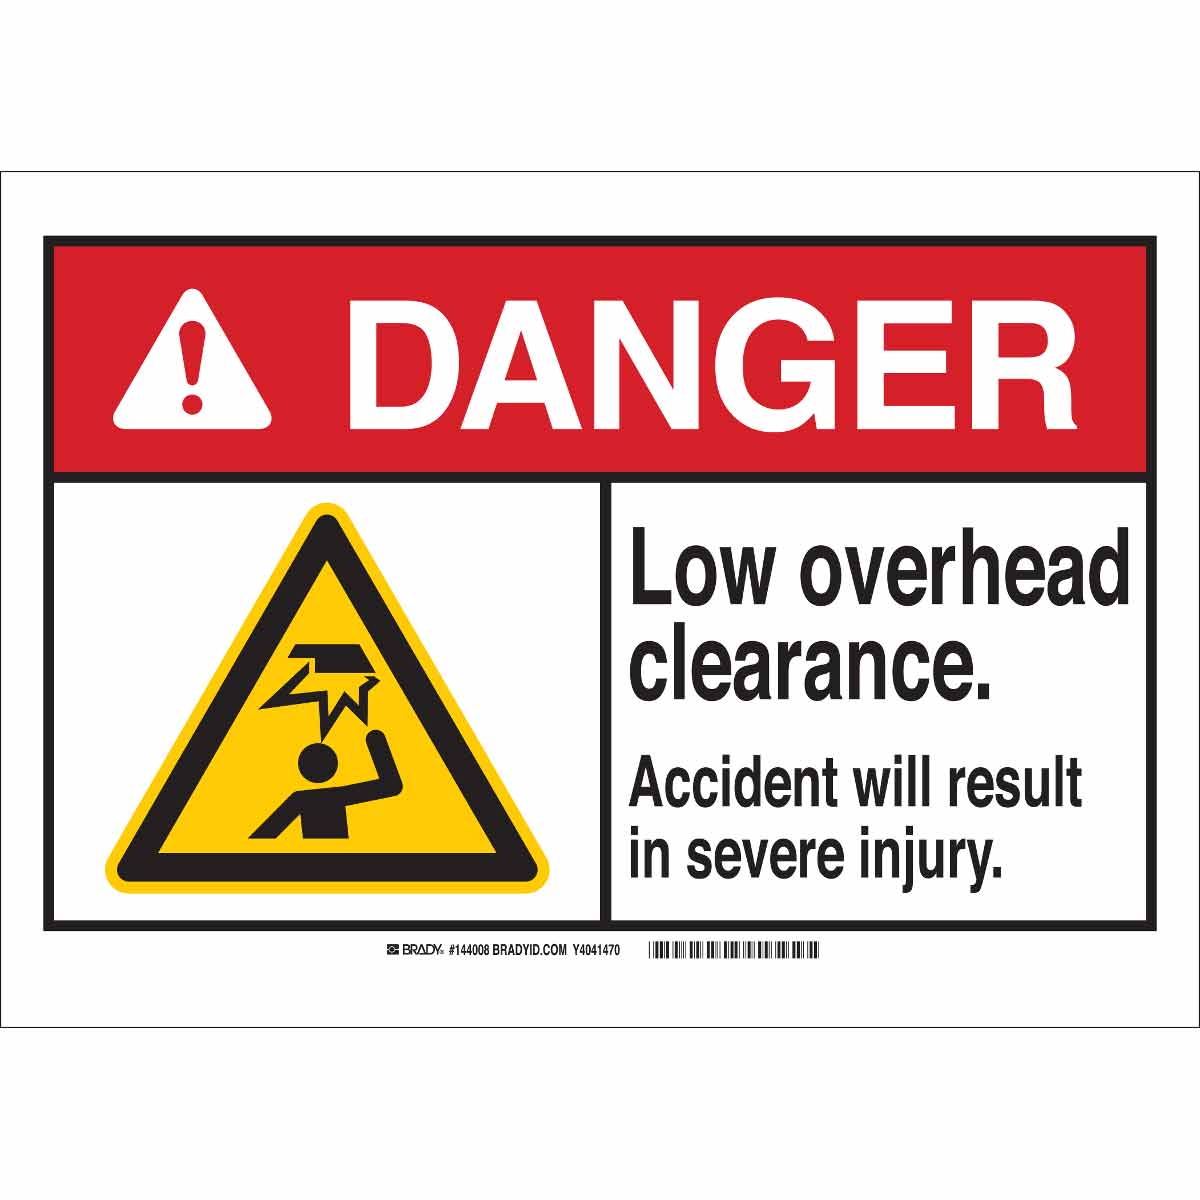 low overhead clearance signs